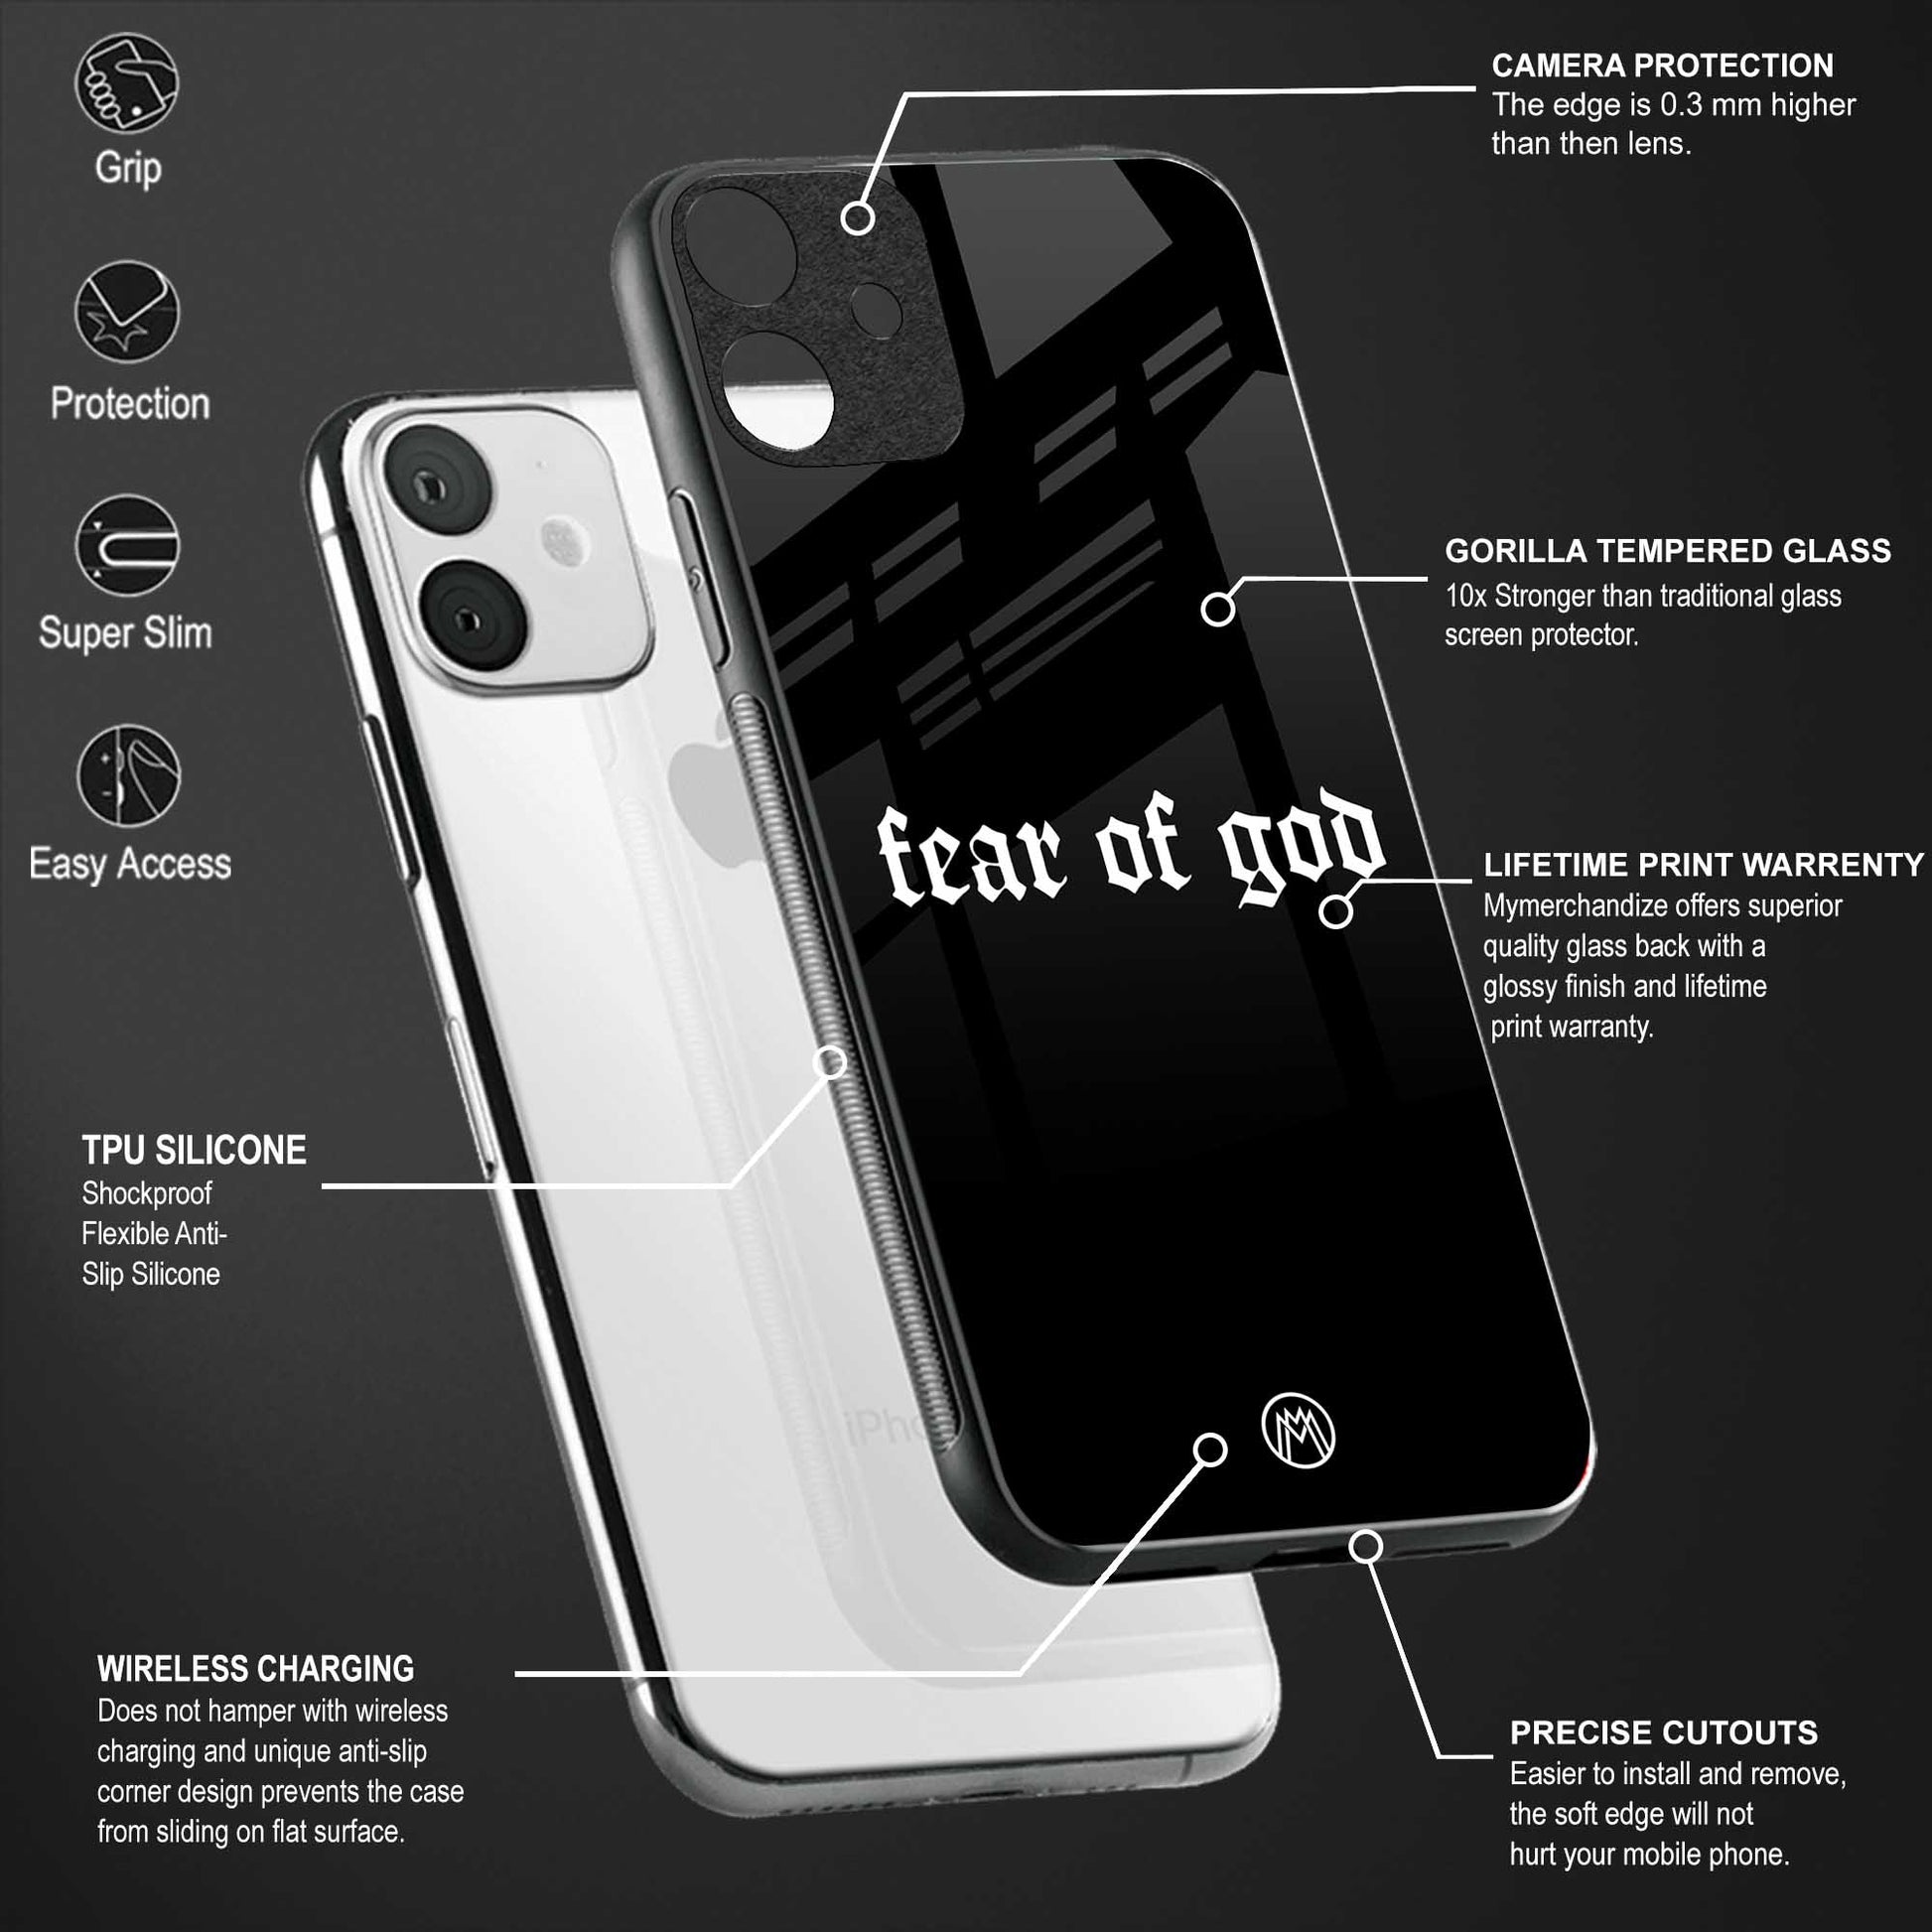 fear of god phone cover for samsung galaxy a30s